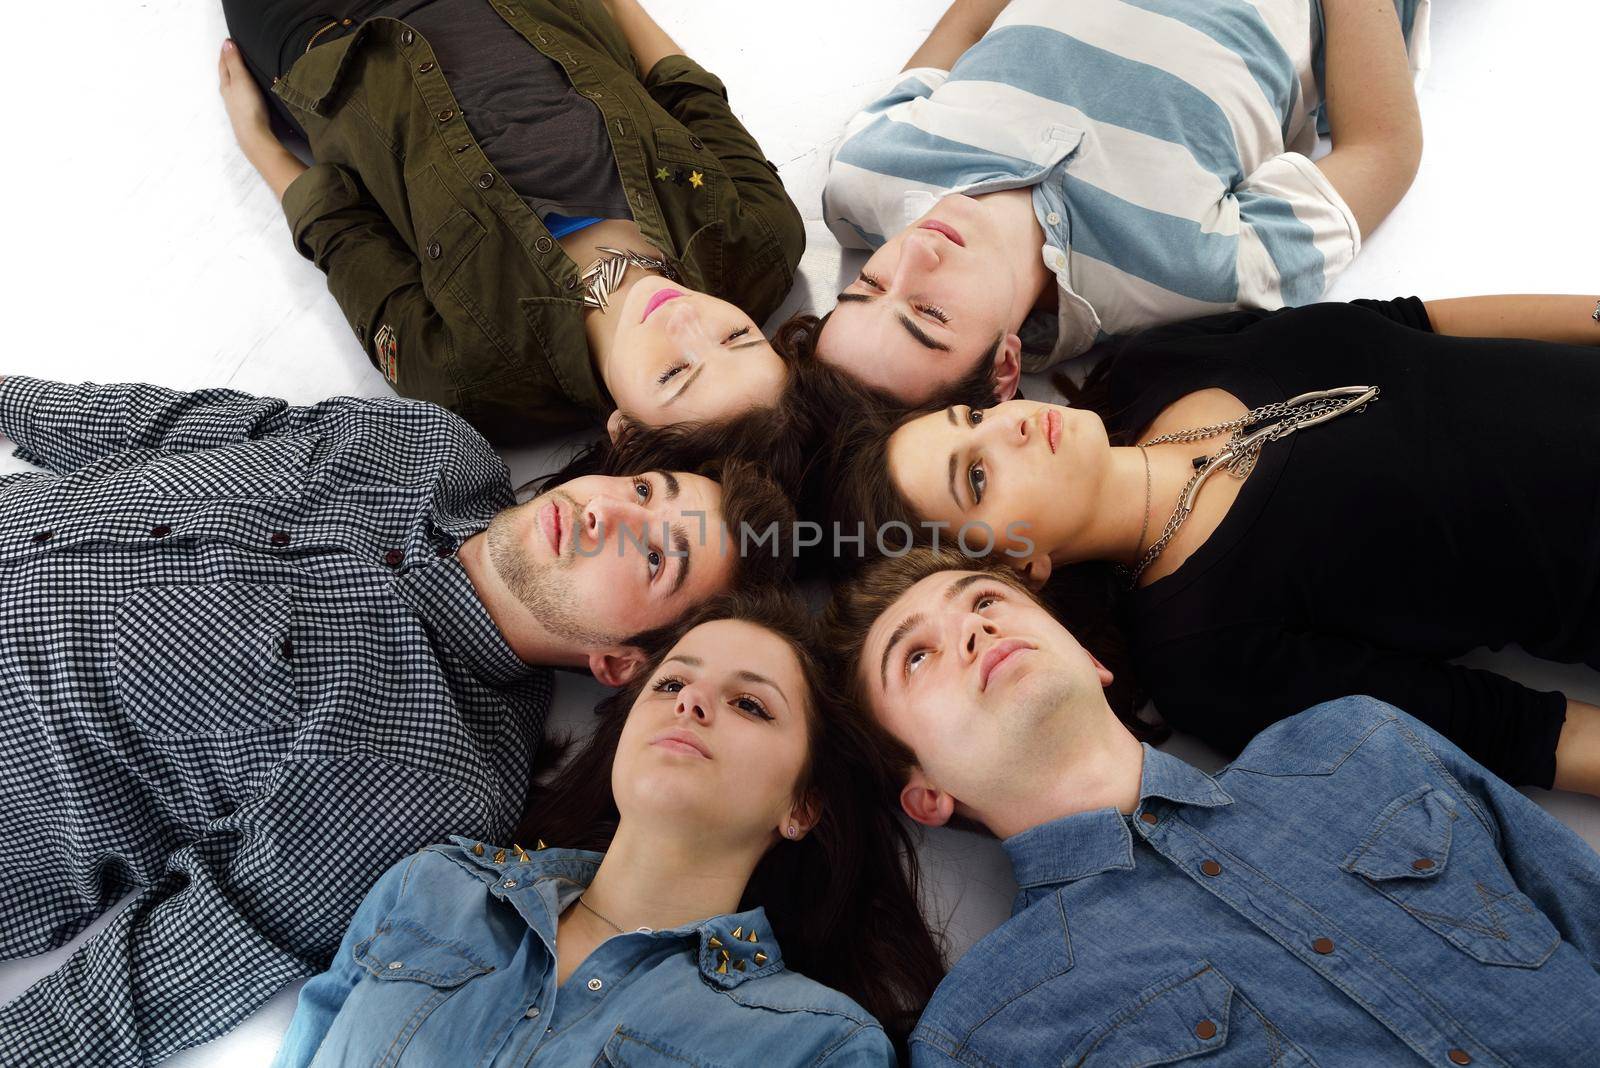 happy teens people group isolated on white background